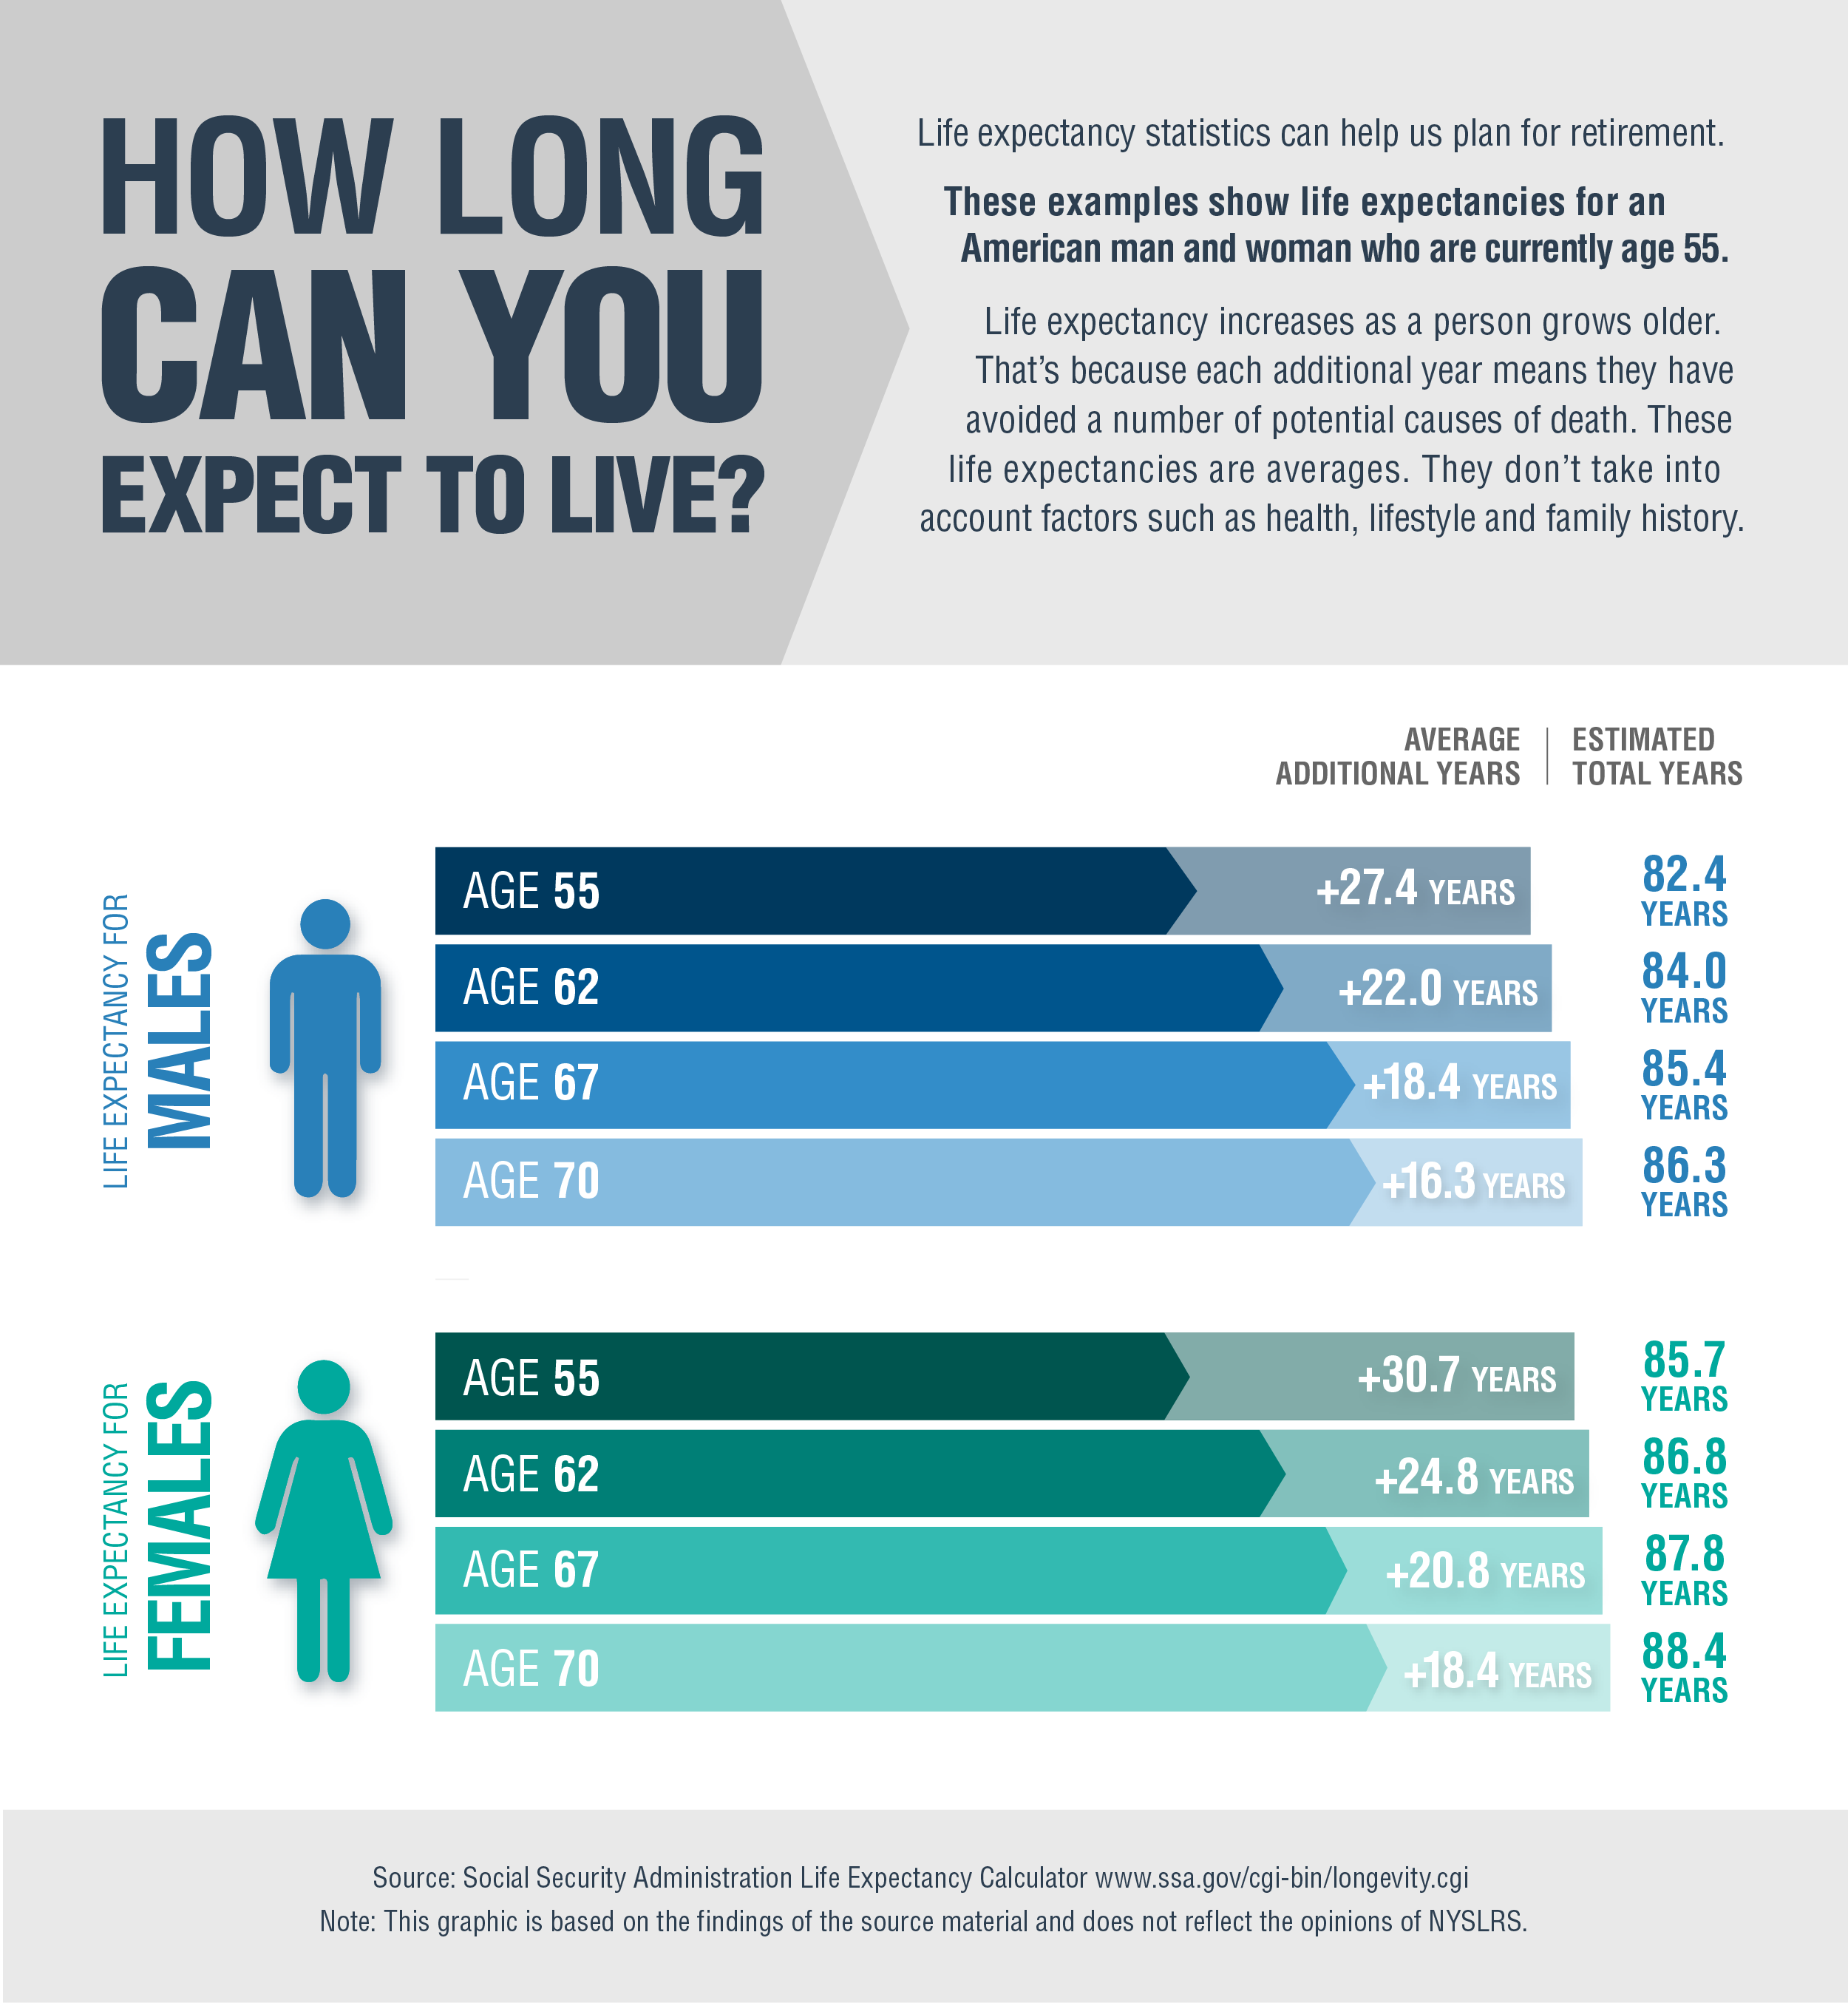 life expectancy statistics to help plan for a long retirement